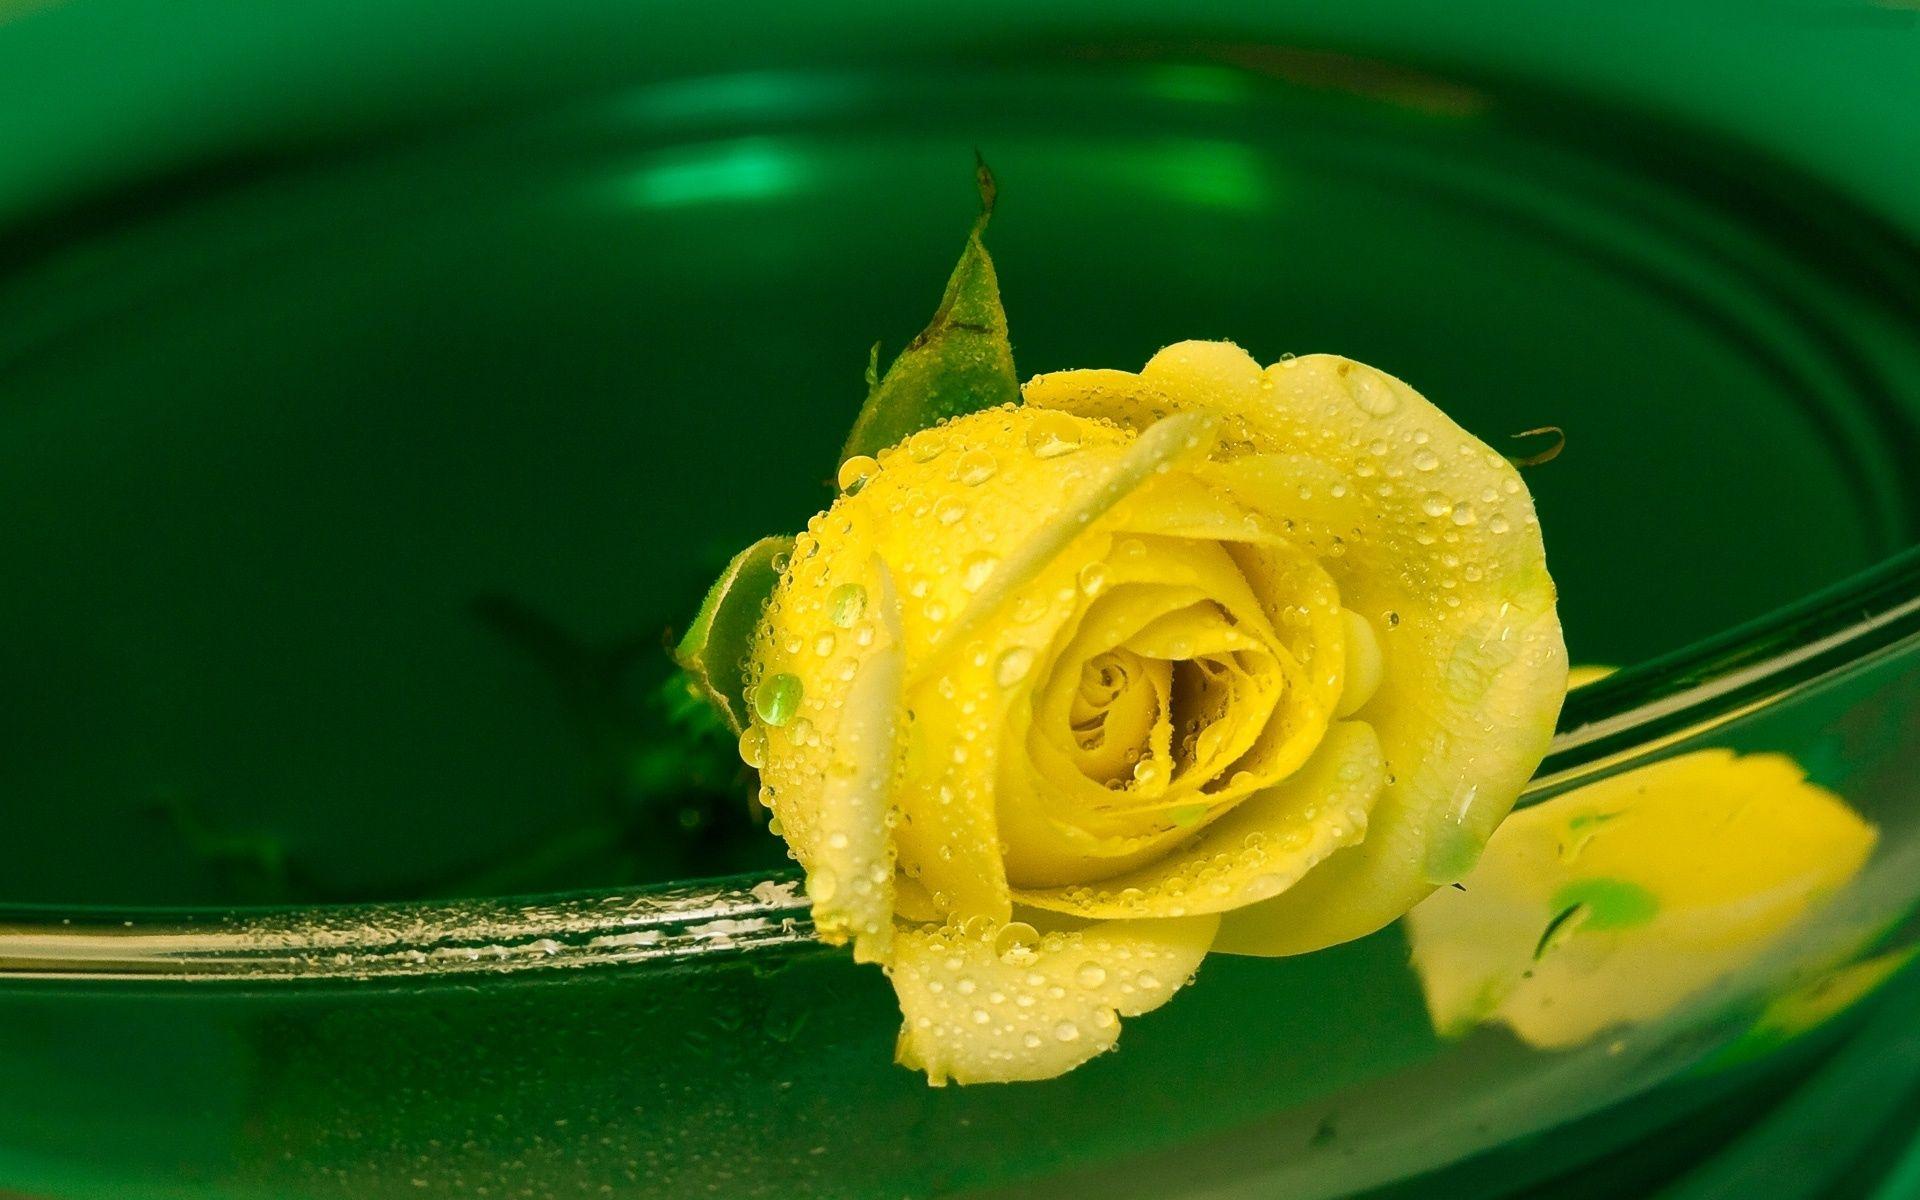 Yellow Rose Wallpaper High Quality